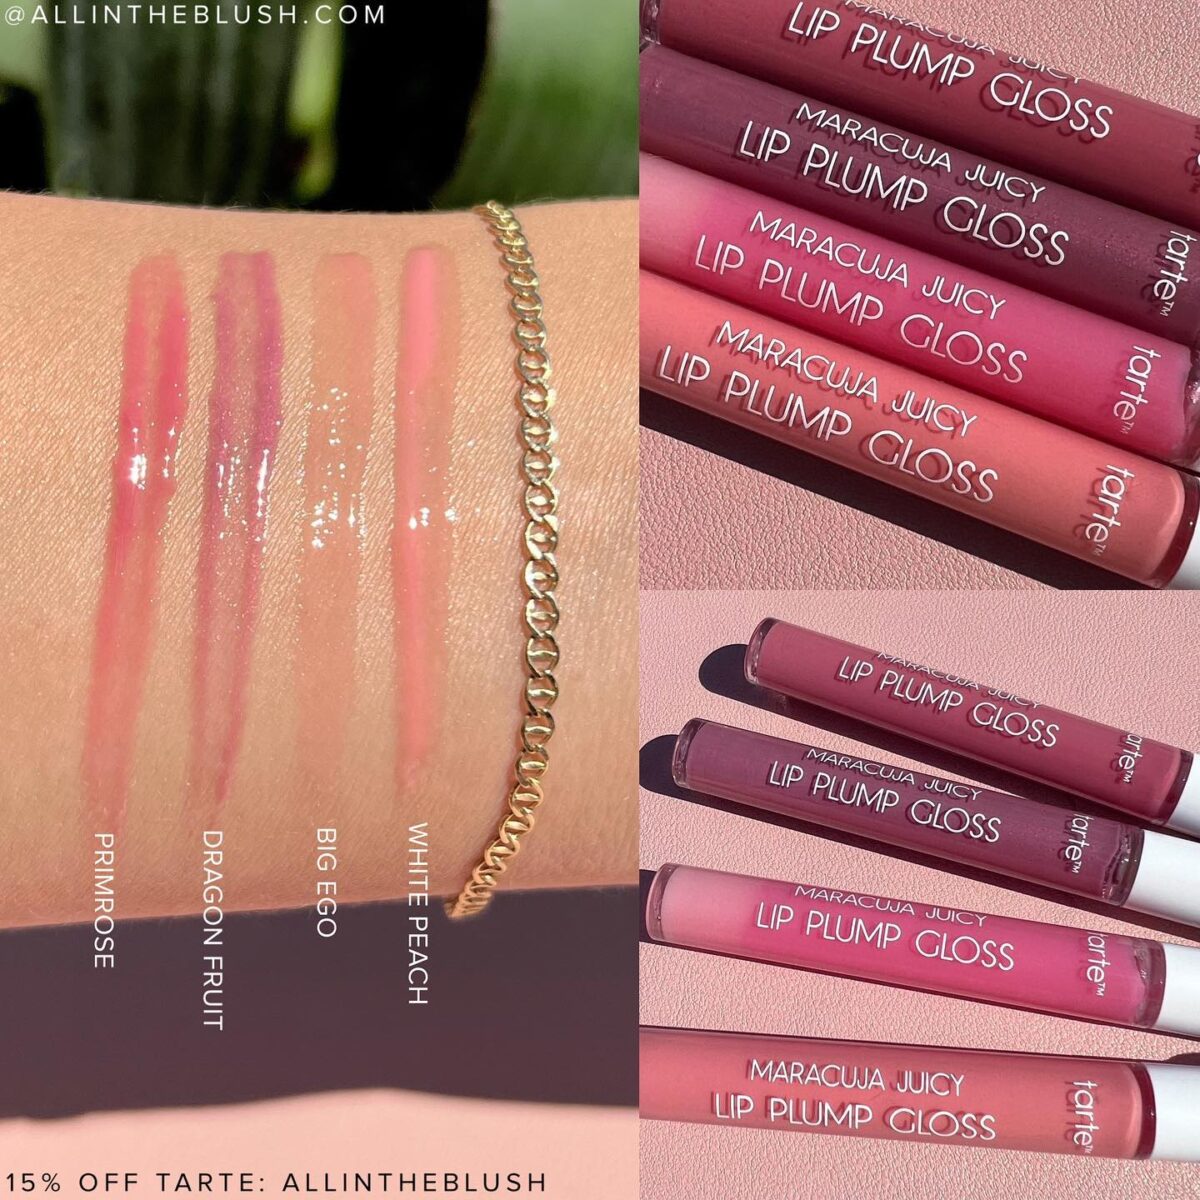 Tarte Maracuja Juicy Lip Plump Gloss Review & Swatches + Save 15% off Tarte with Code: ALLINTHEBLUSH